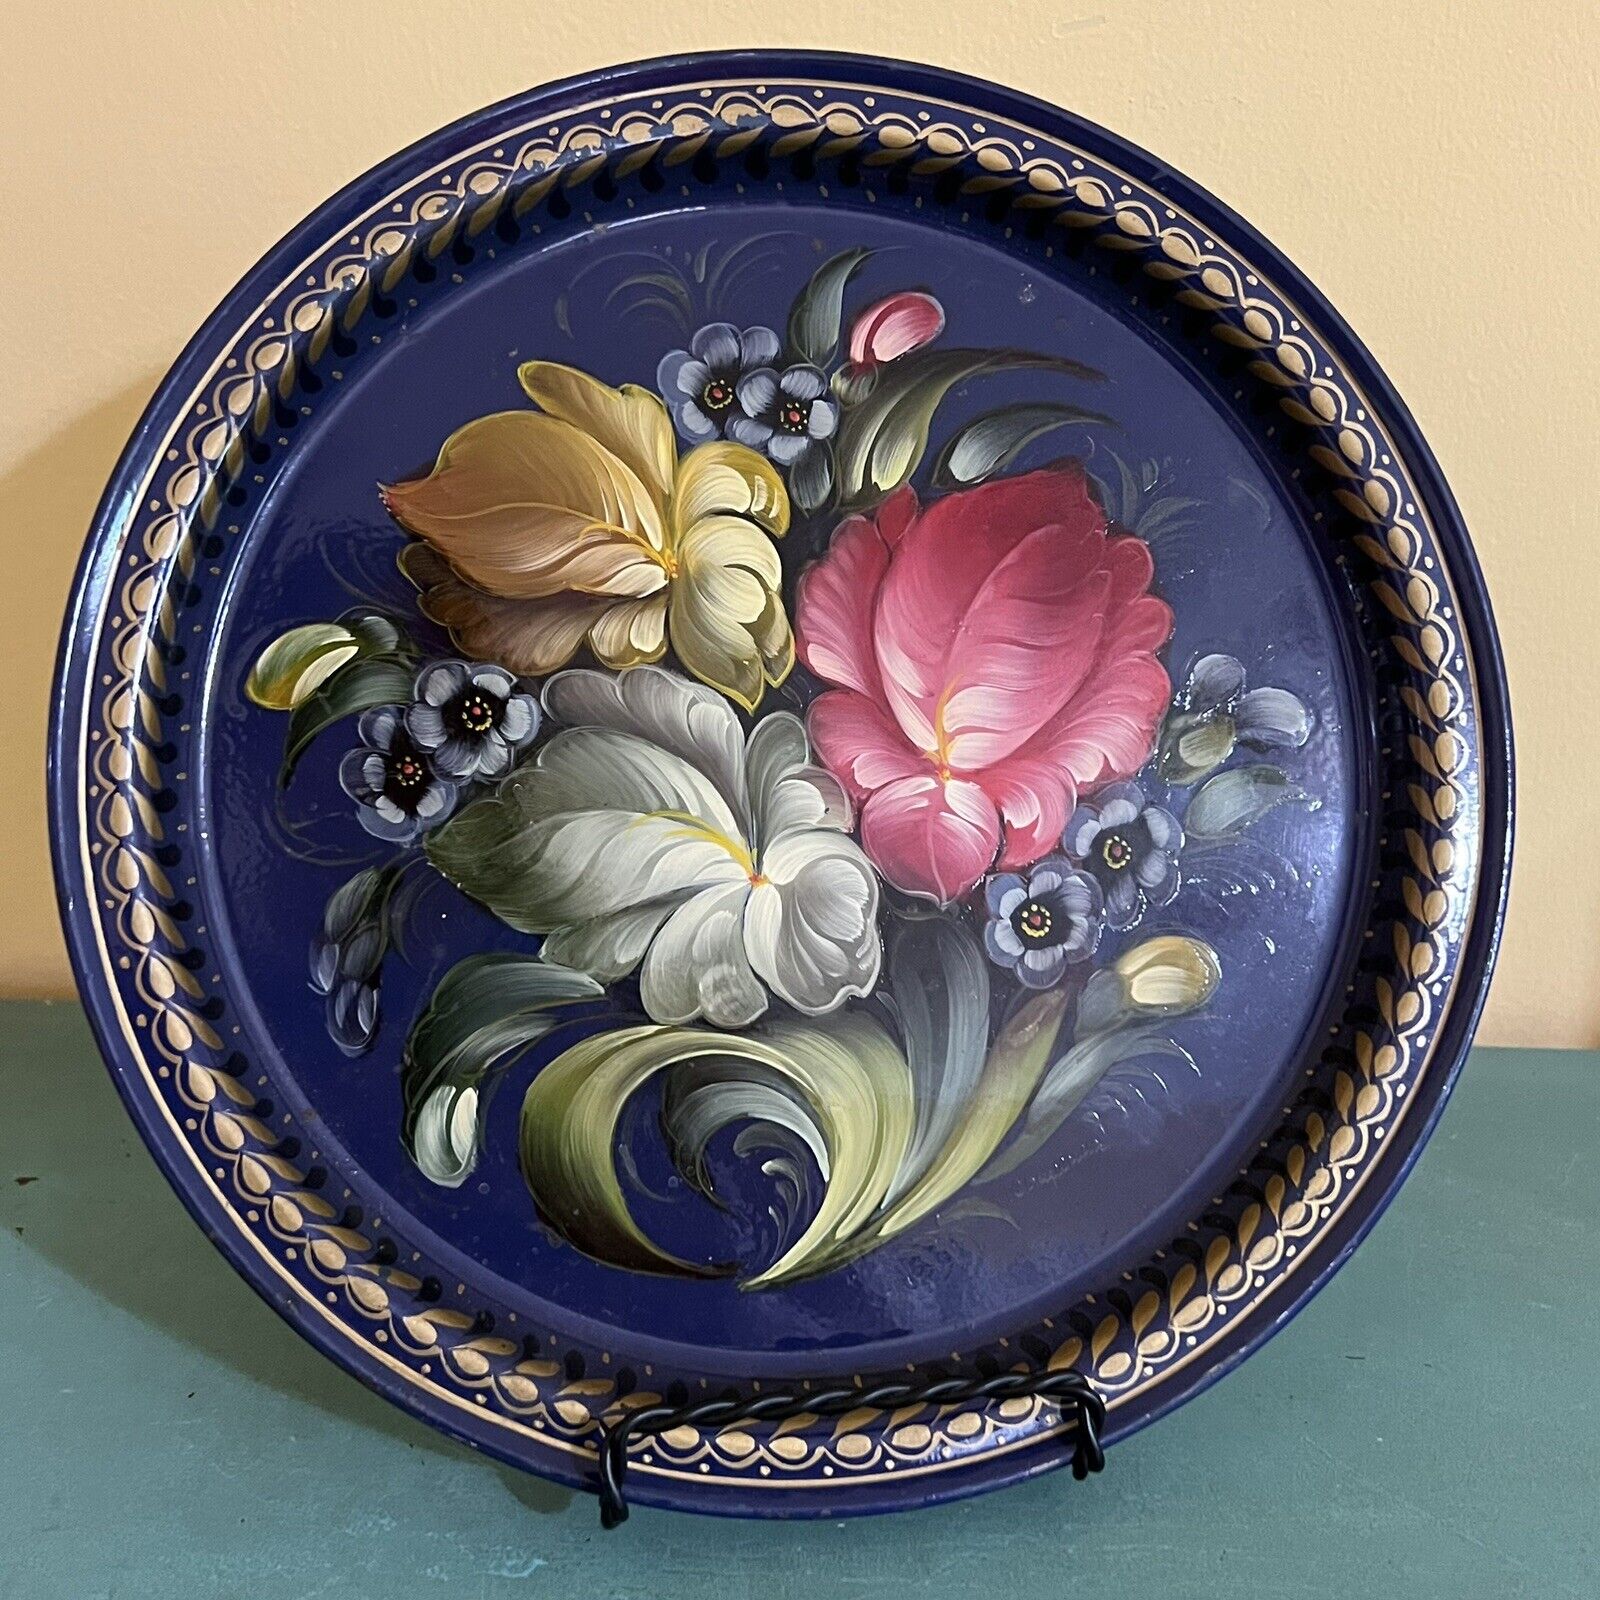 Vintage Russian Enamel Hand Painted 8.5” Dresser Tray Plate Blue Floral Toleware